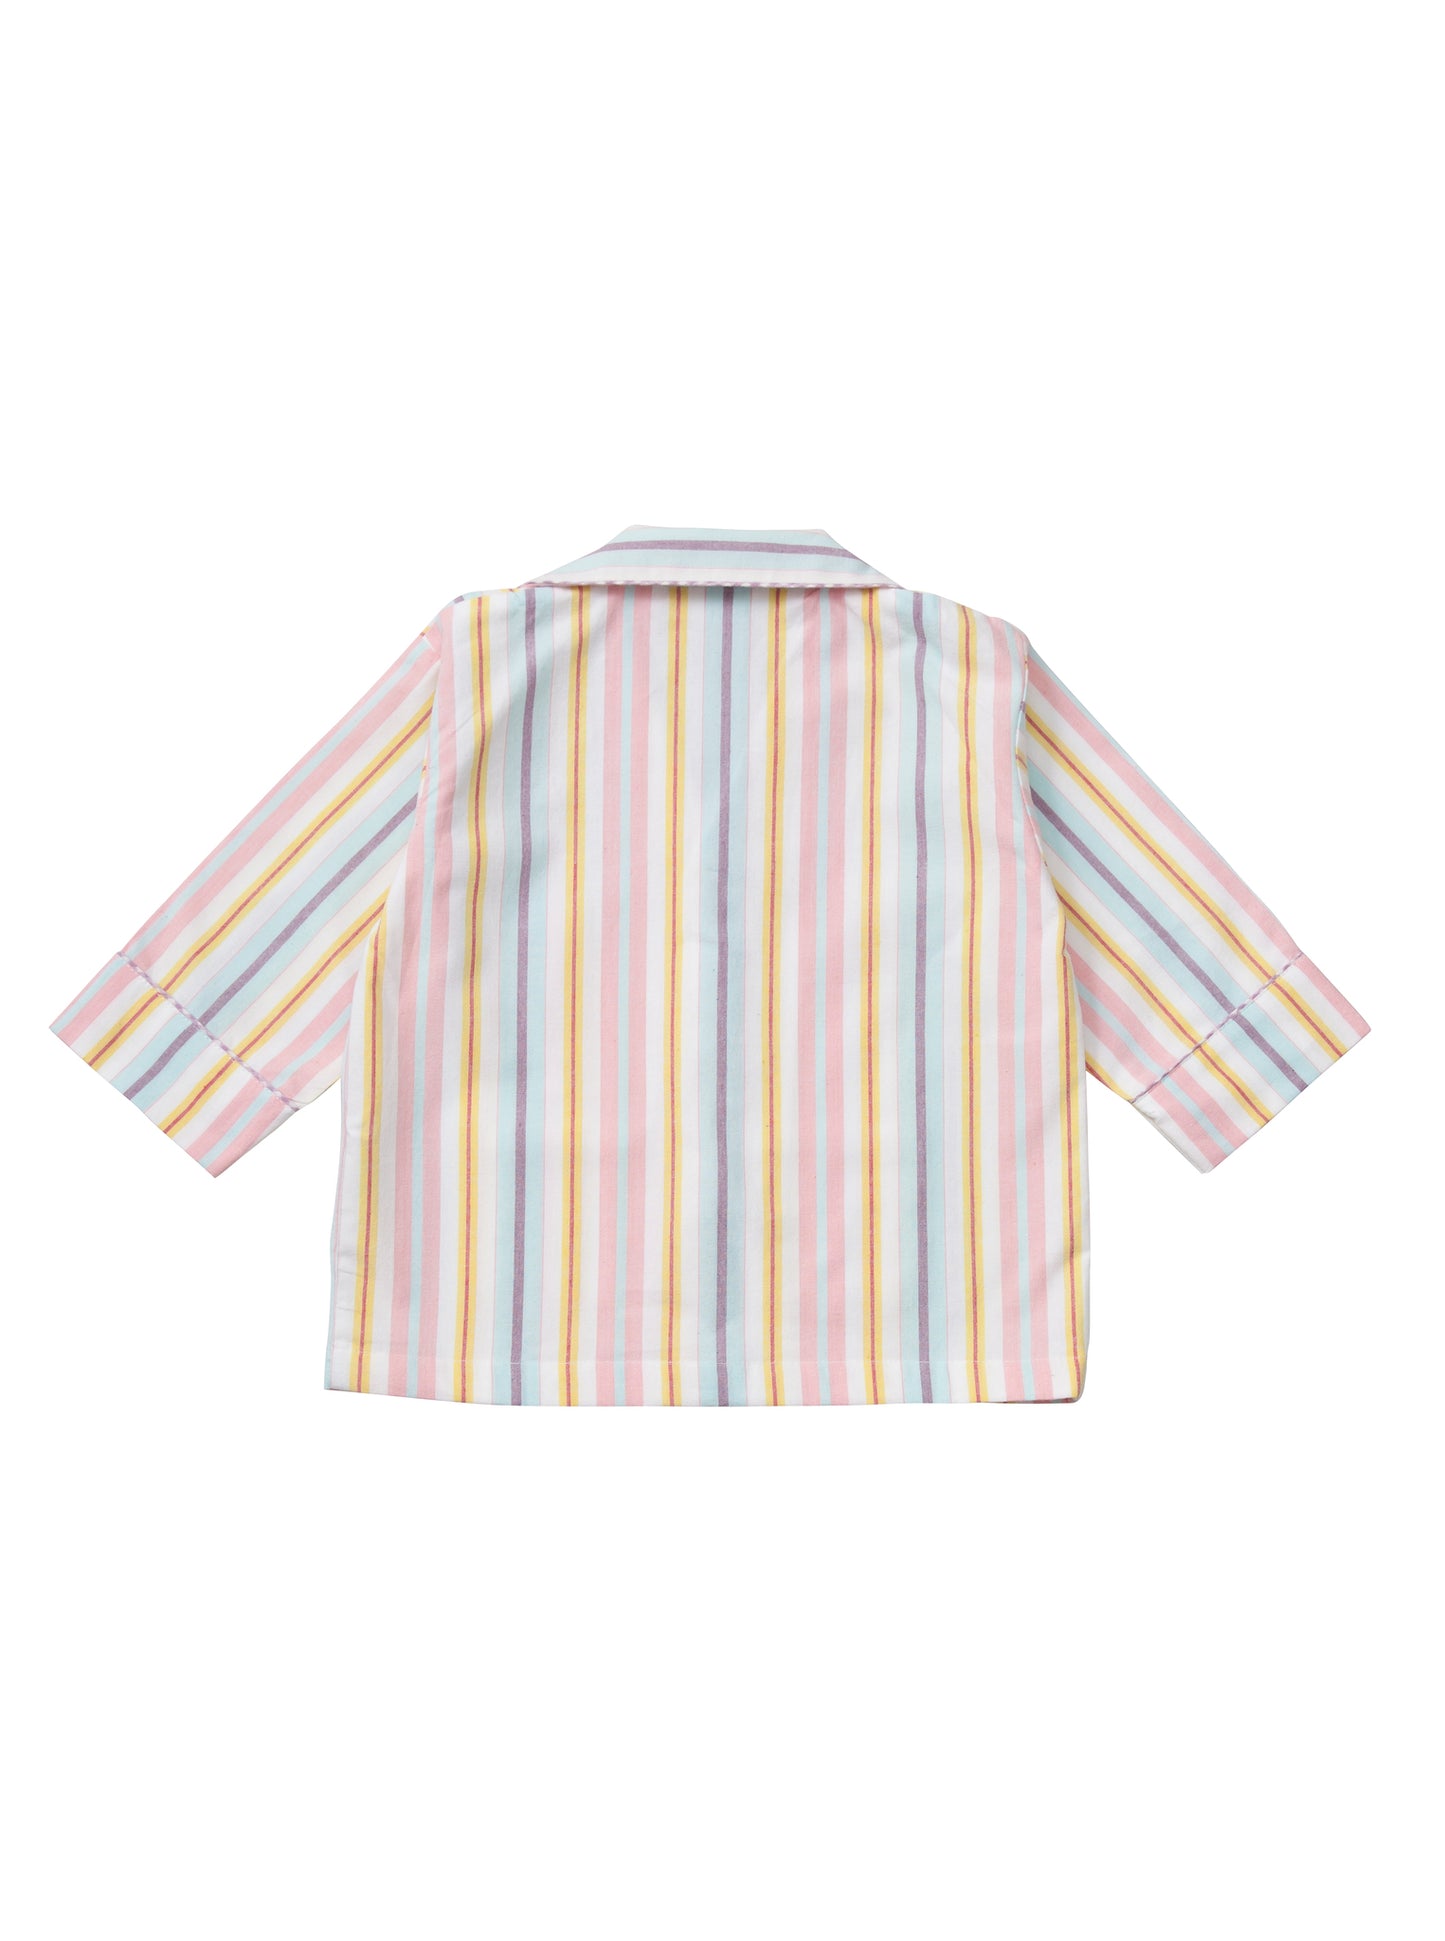 Cotton candy and all things nice, these stripe cotton pyjamas suit all children. From Turquaz. Top back.